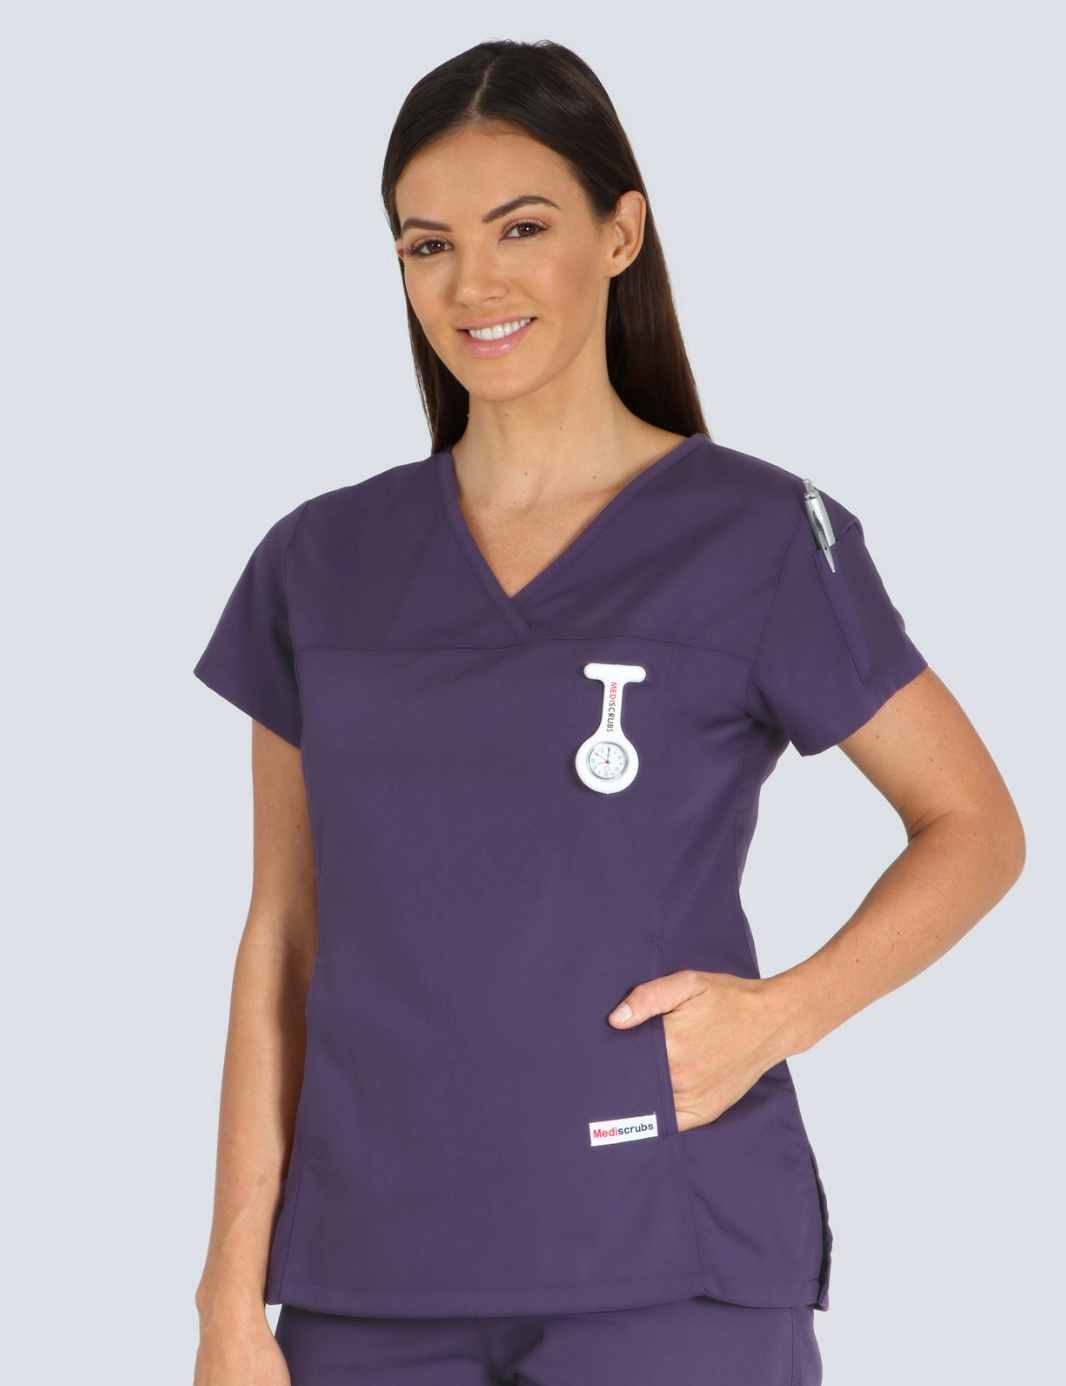 Wollongong Pharmacy (Women's Fit Solid Scrub Top in Aubergine incl Logos)